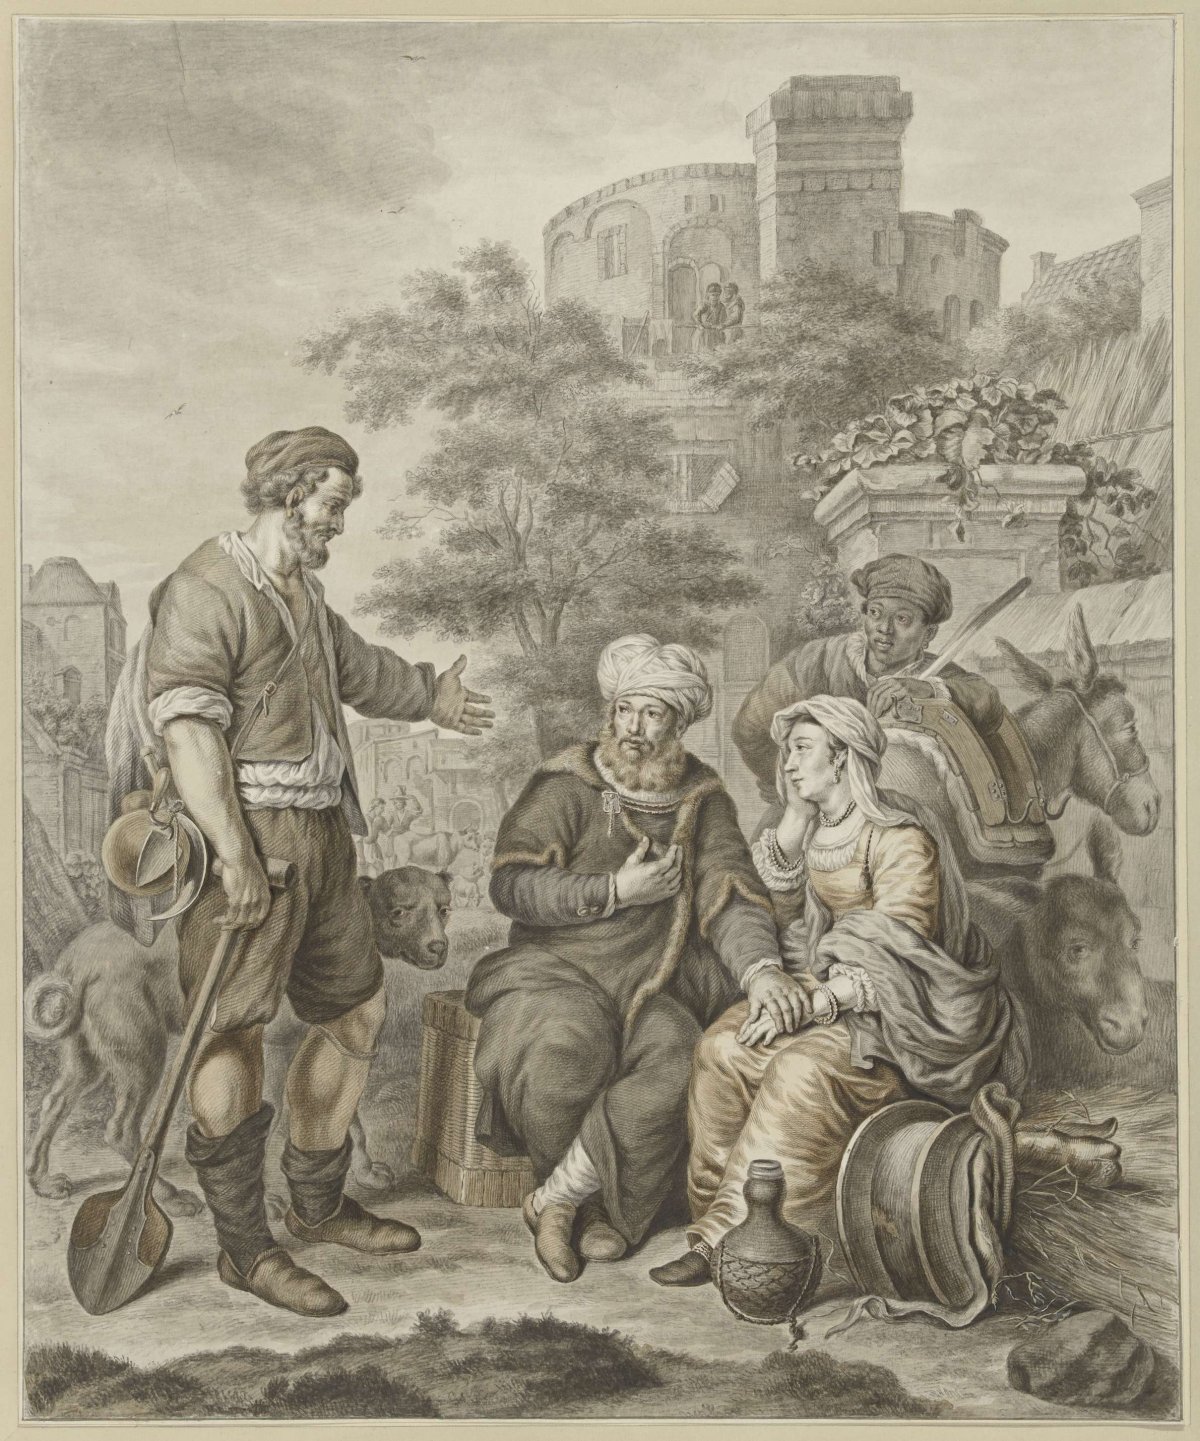 The Levite and his concubine in Gibeah, Abraham Delfos, 1797